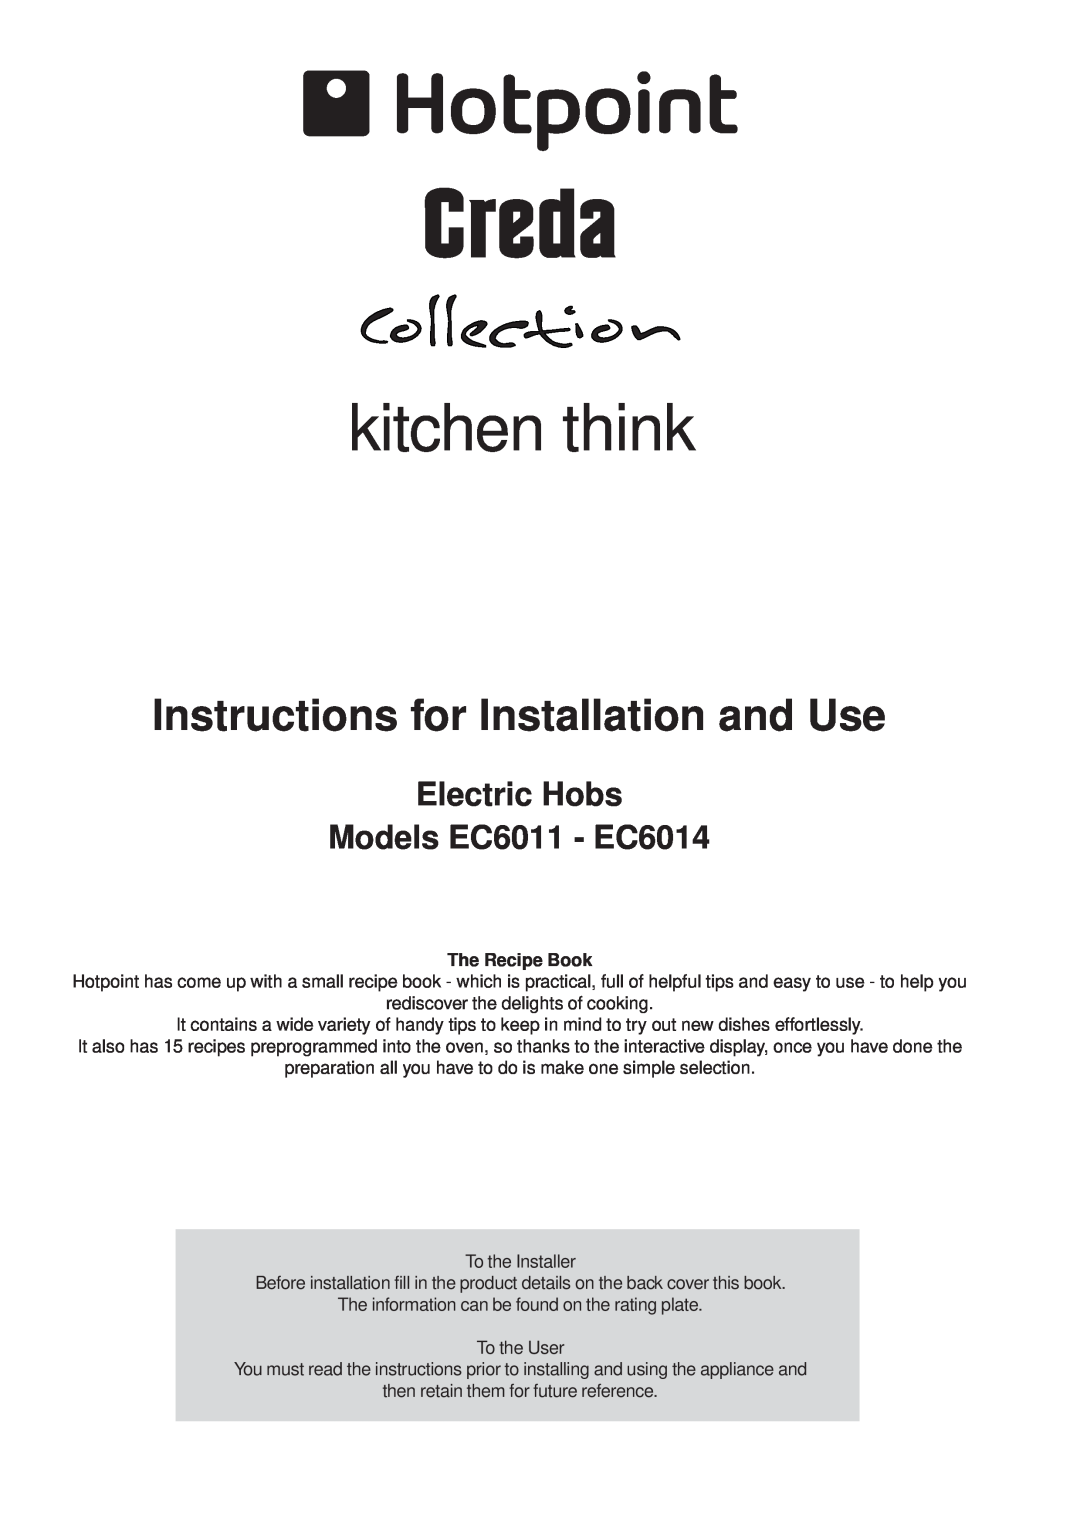 Hotpoint manual Electric Hobs Models EC6011 - EC6014, kitchen think, Instructions for Installation and Use 